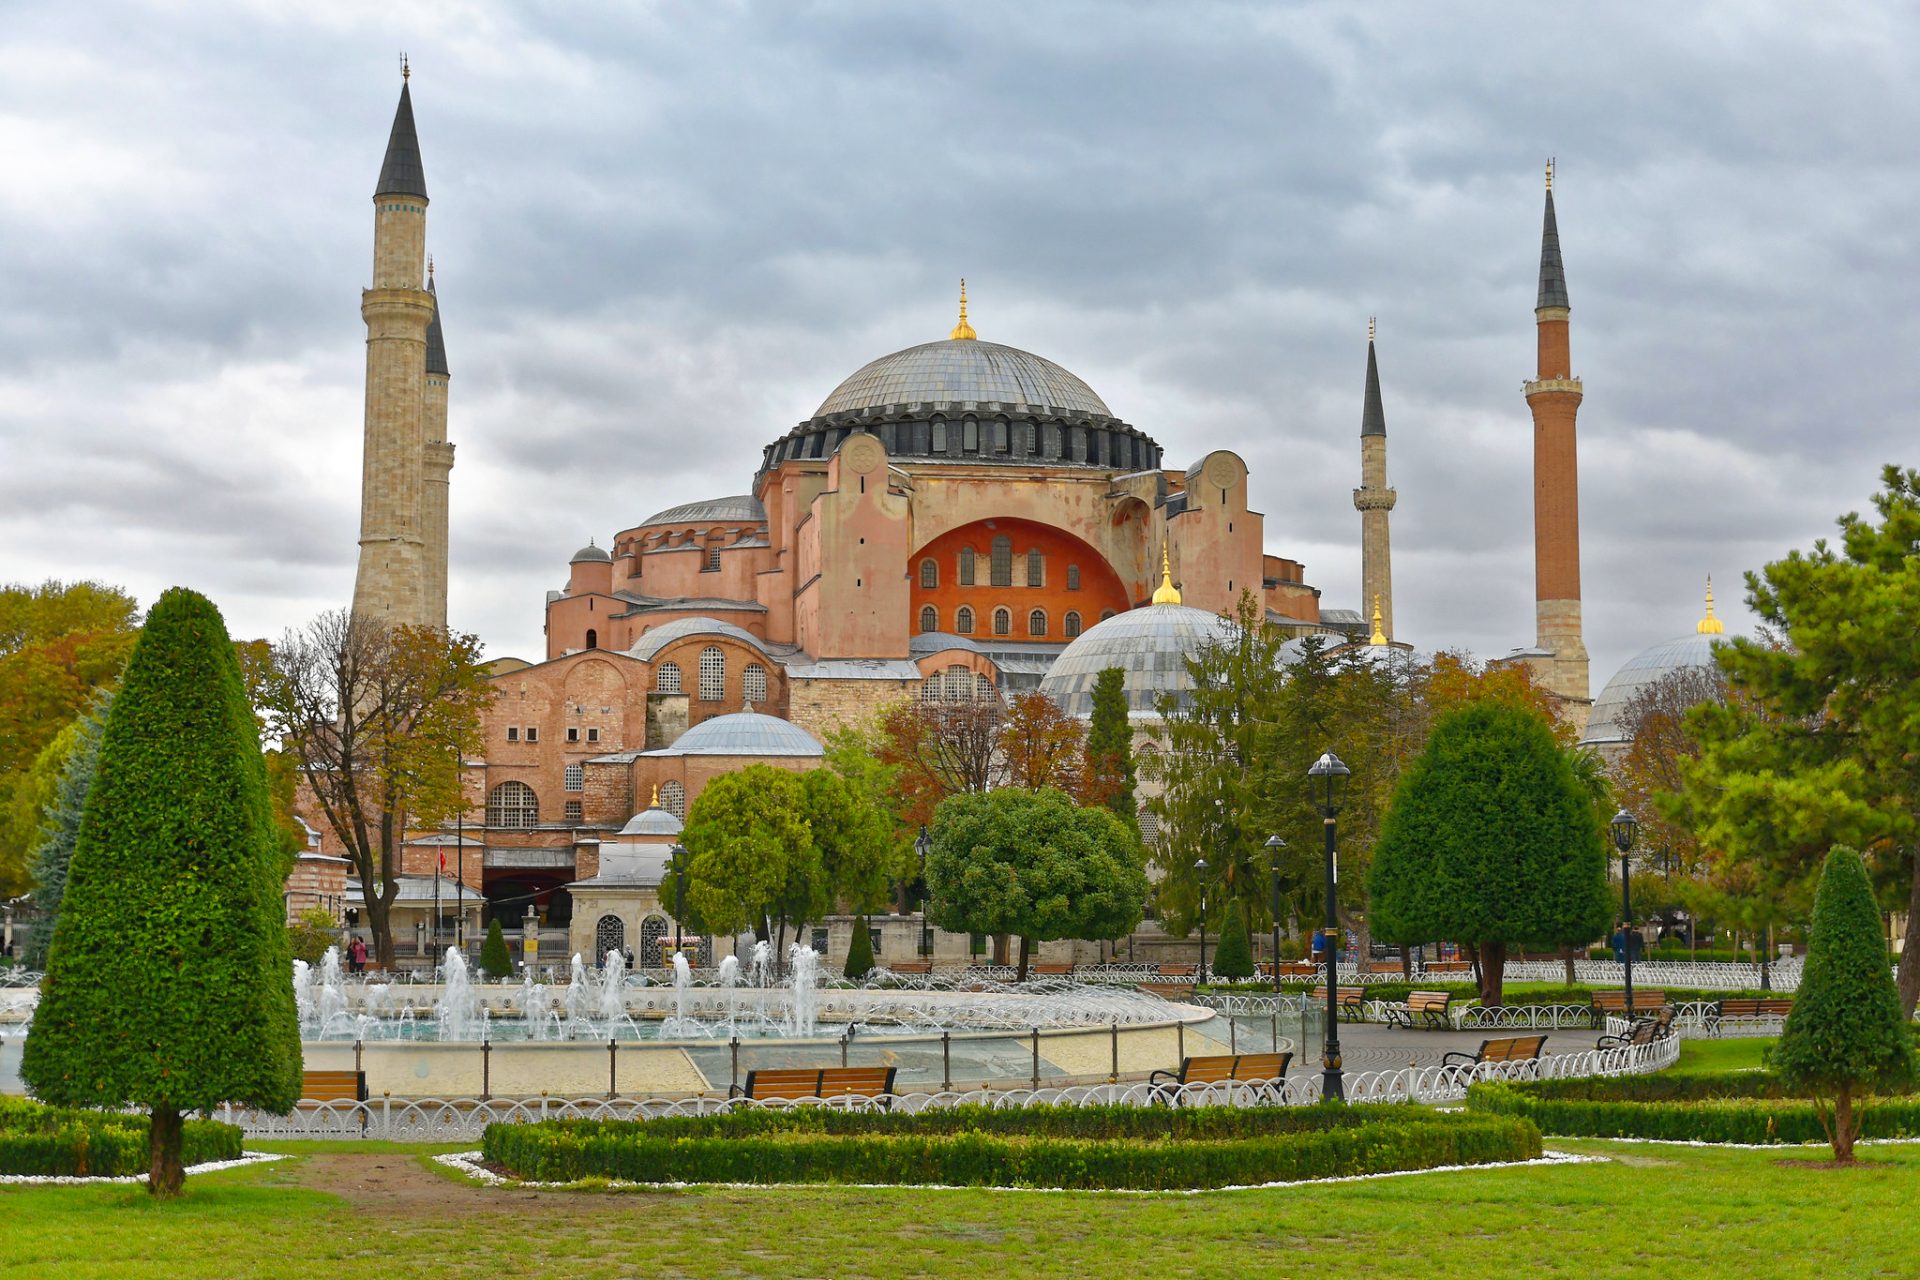 A photo of the Hagia Sophia, a former cathedral, mosque, and museum in Istanbul, Turkey, with a dome and four minarets on a cloudy day.